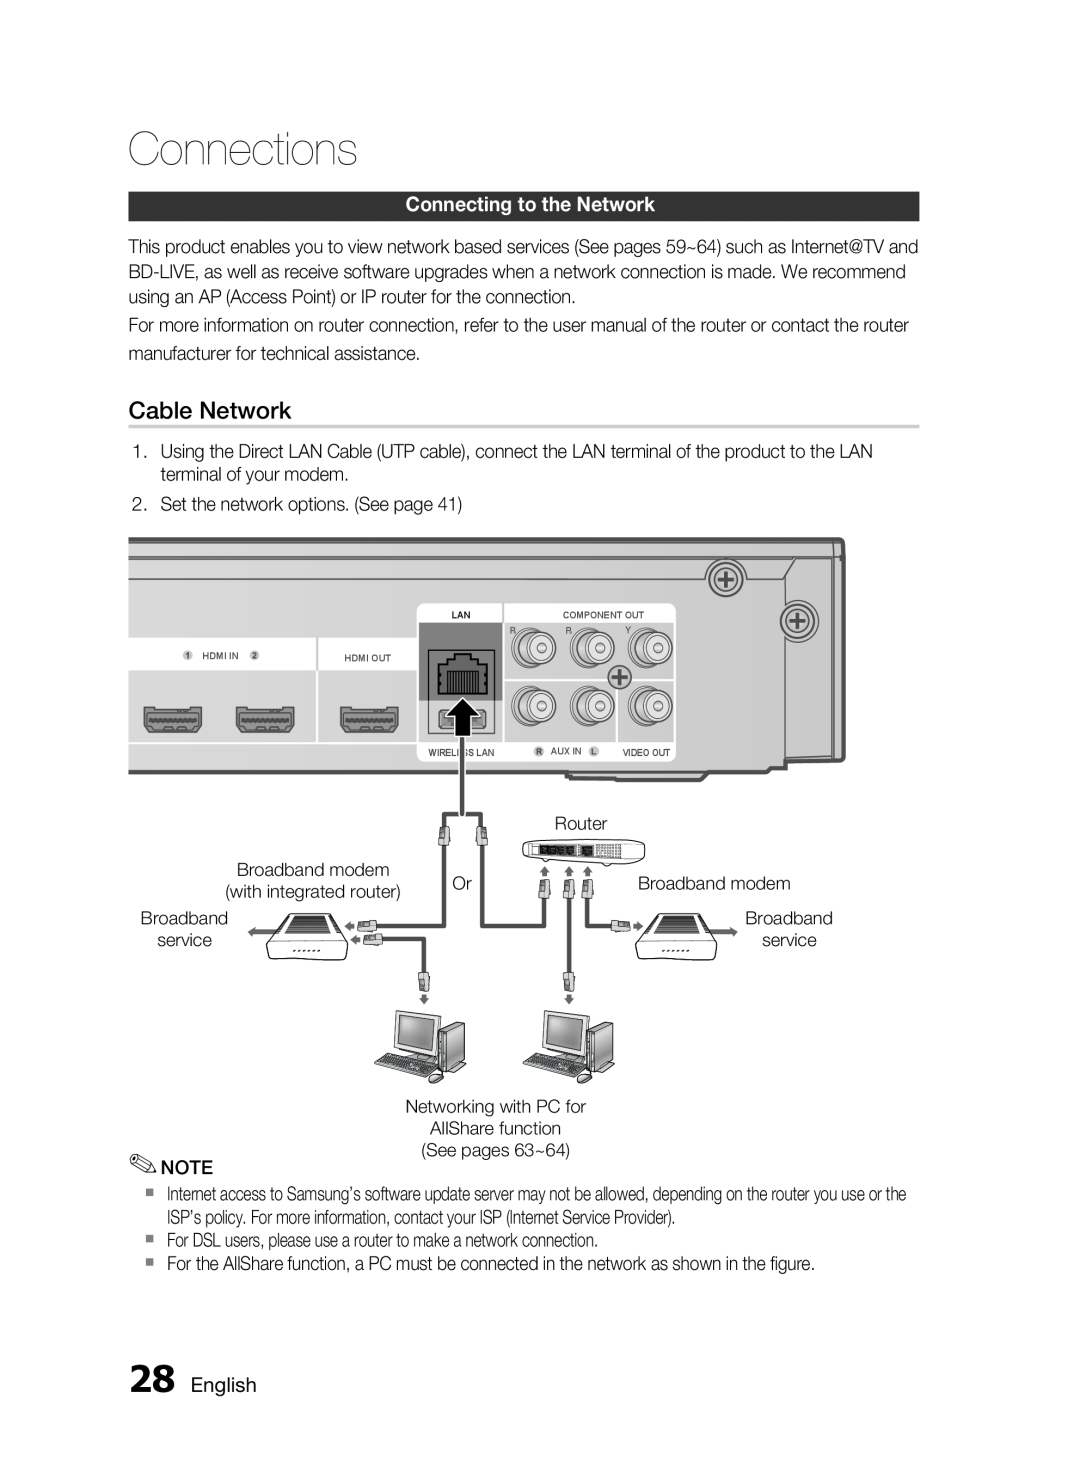 Samsung C6600 user manual Cable Network, Connecting to the Network, English, Connections 